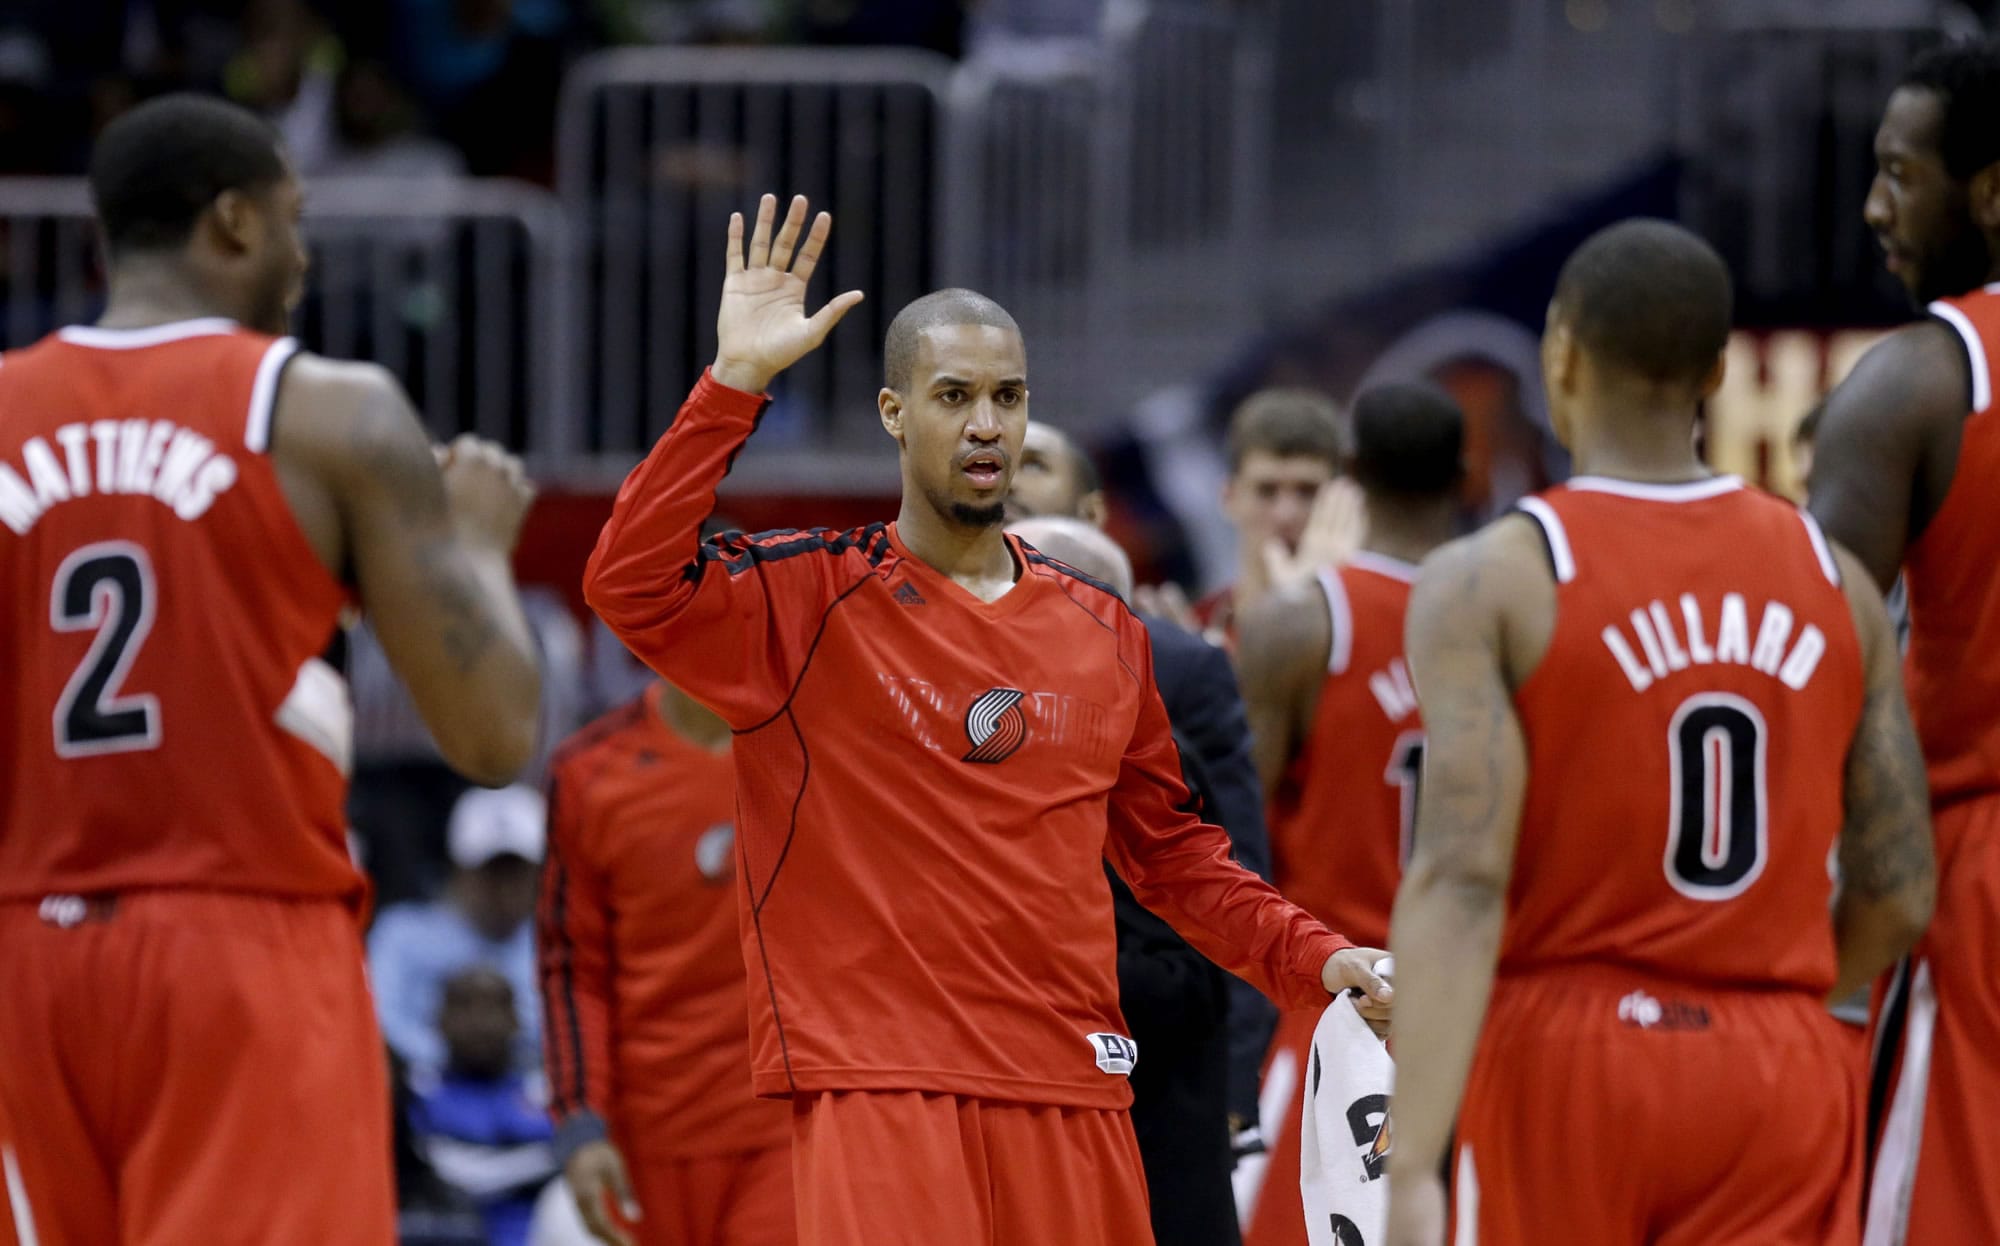 Portland is the third NBA stop for guard Eric Maynor.